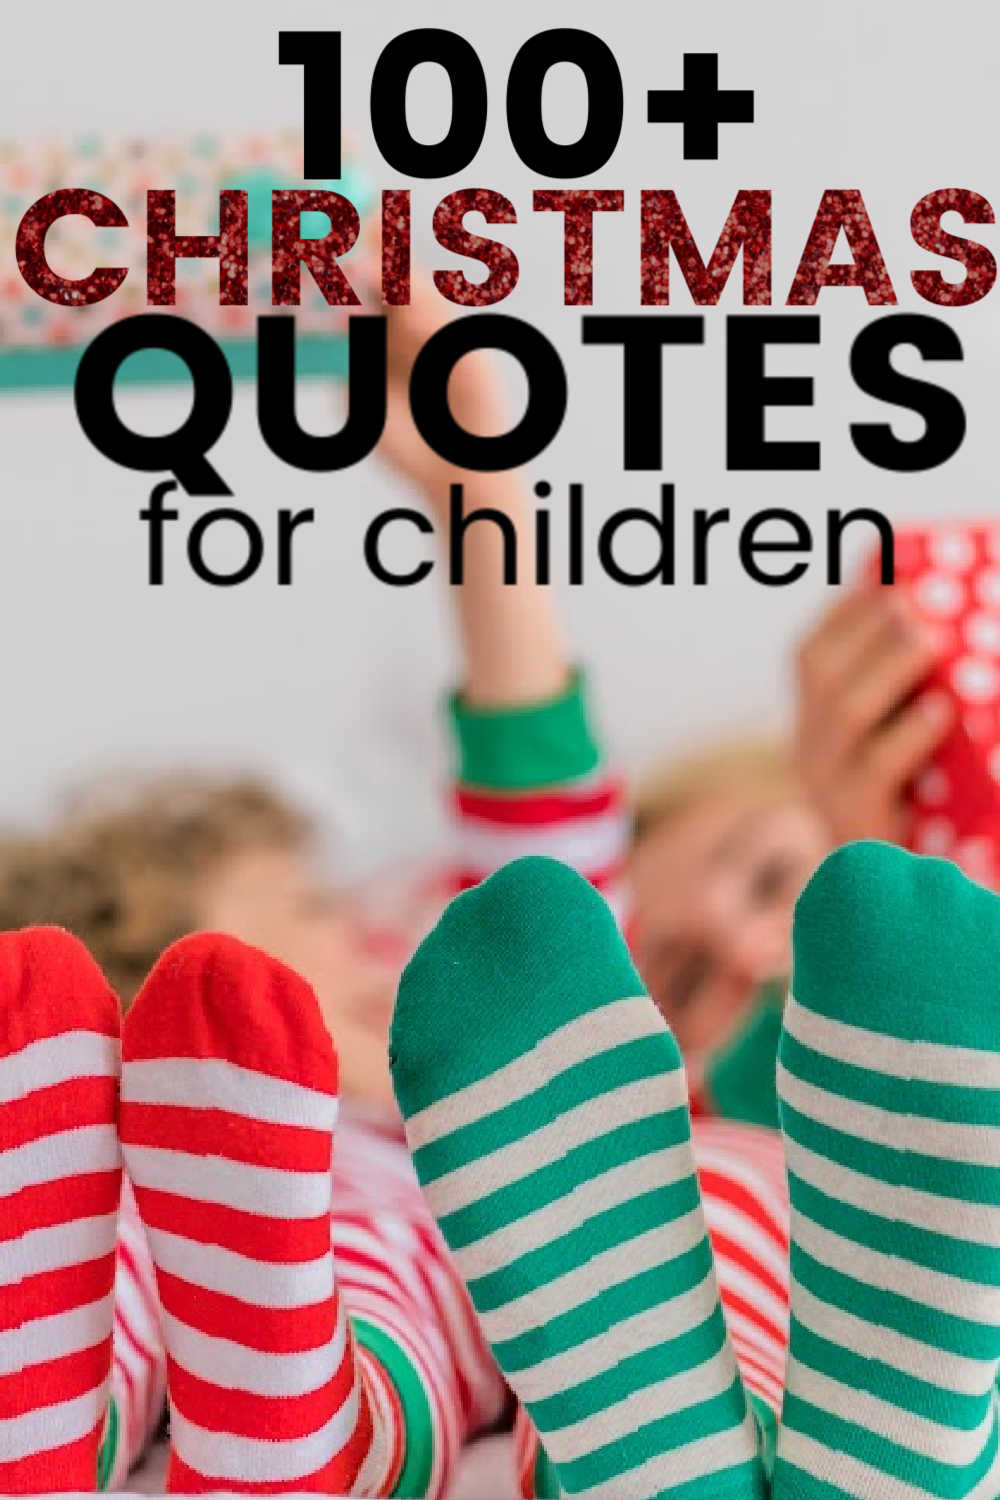 Christmas Quotes For Children {100 Children's Christmas Quotes)